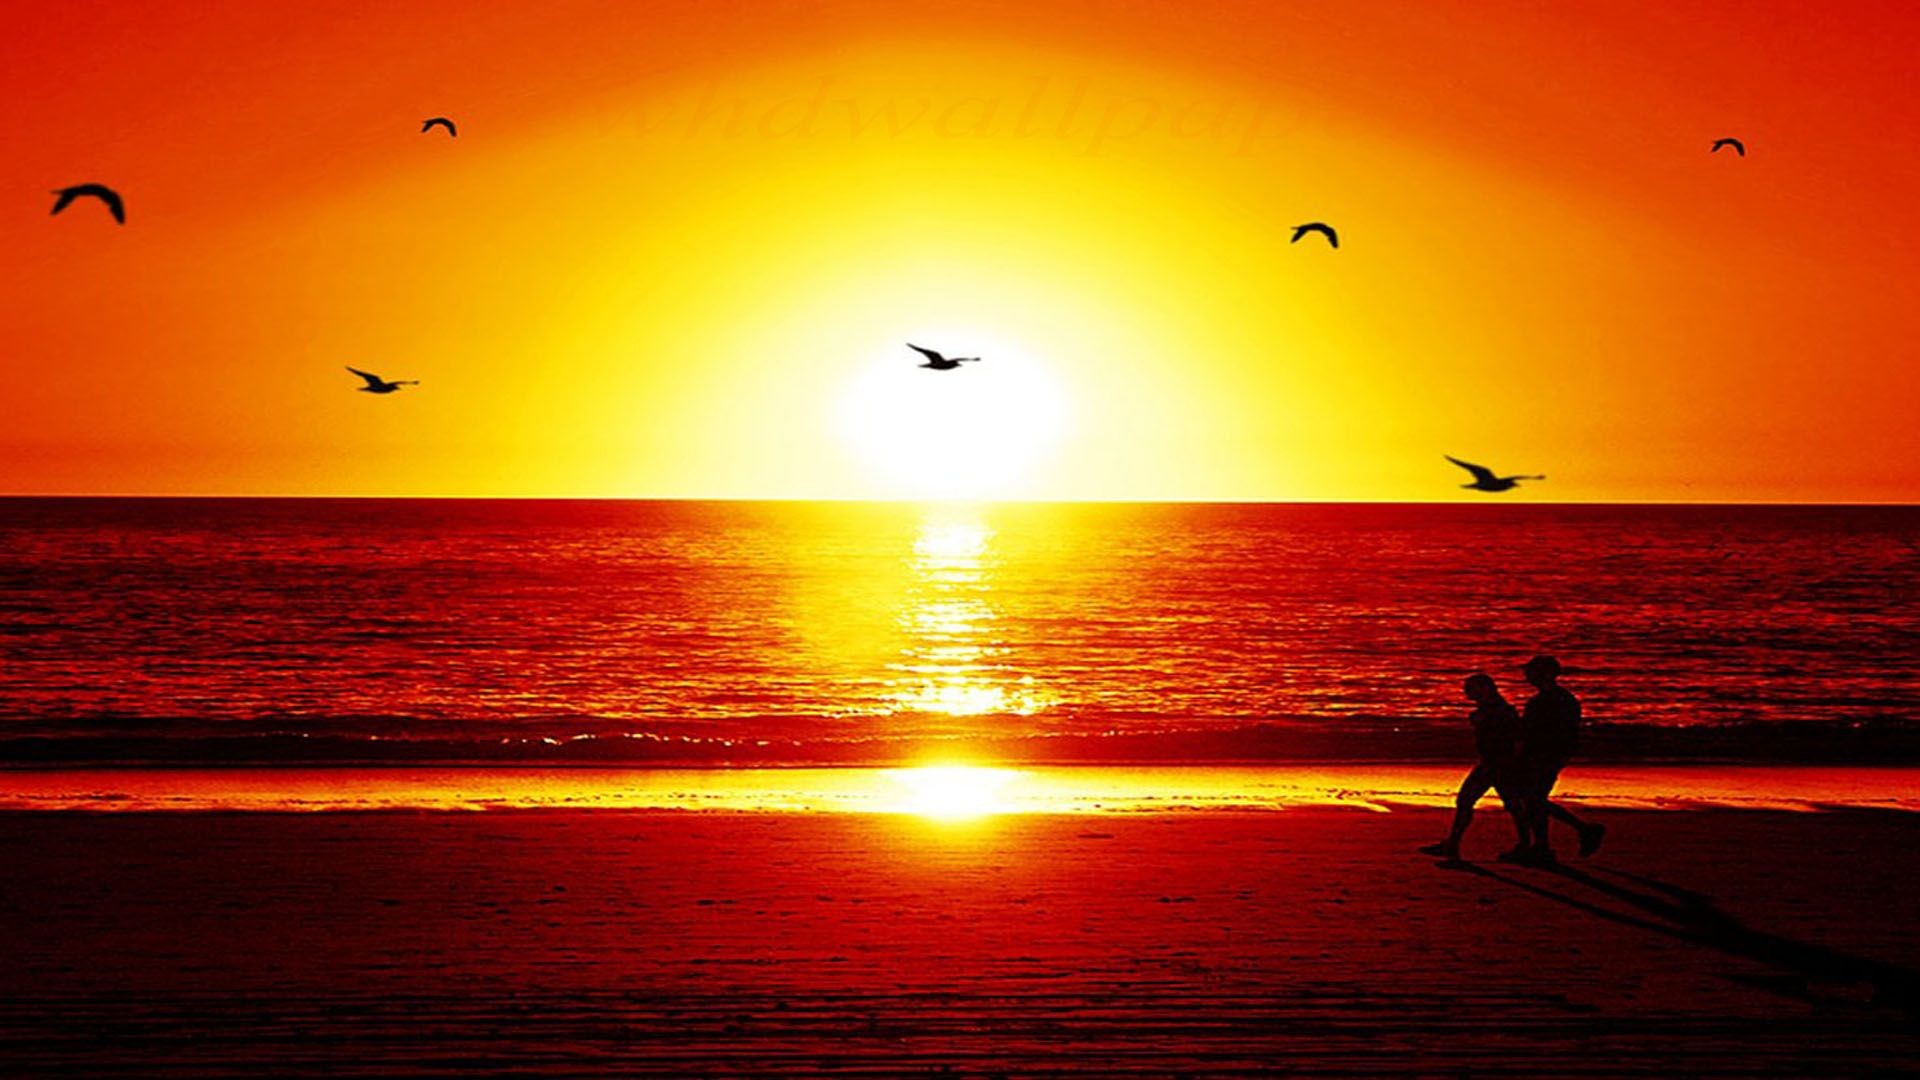 Wallpaper Details File Name Sunset HD Widescreen Uploaded By